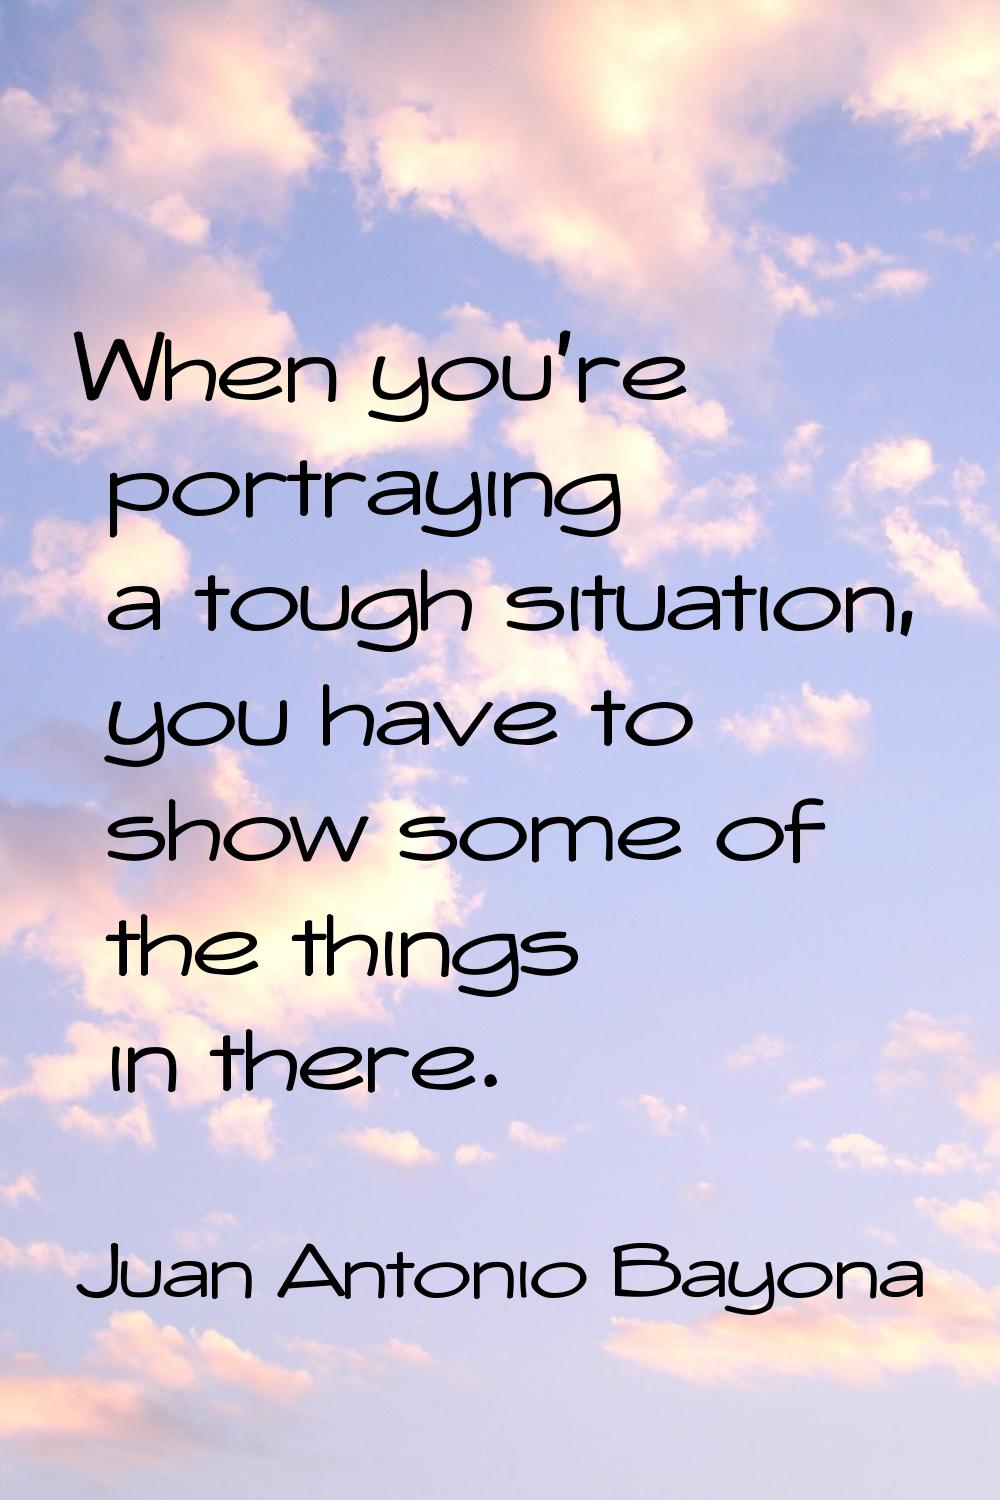 When you're portraying a tough situation, you have to show some of the things in there.